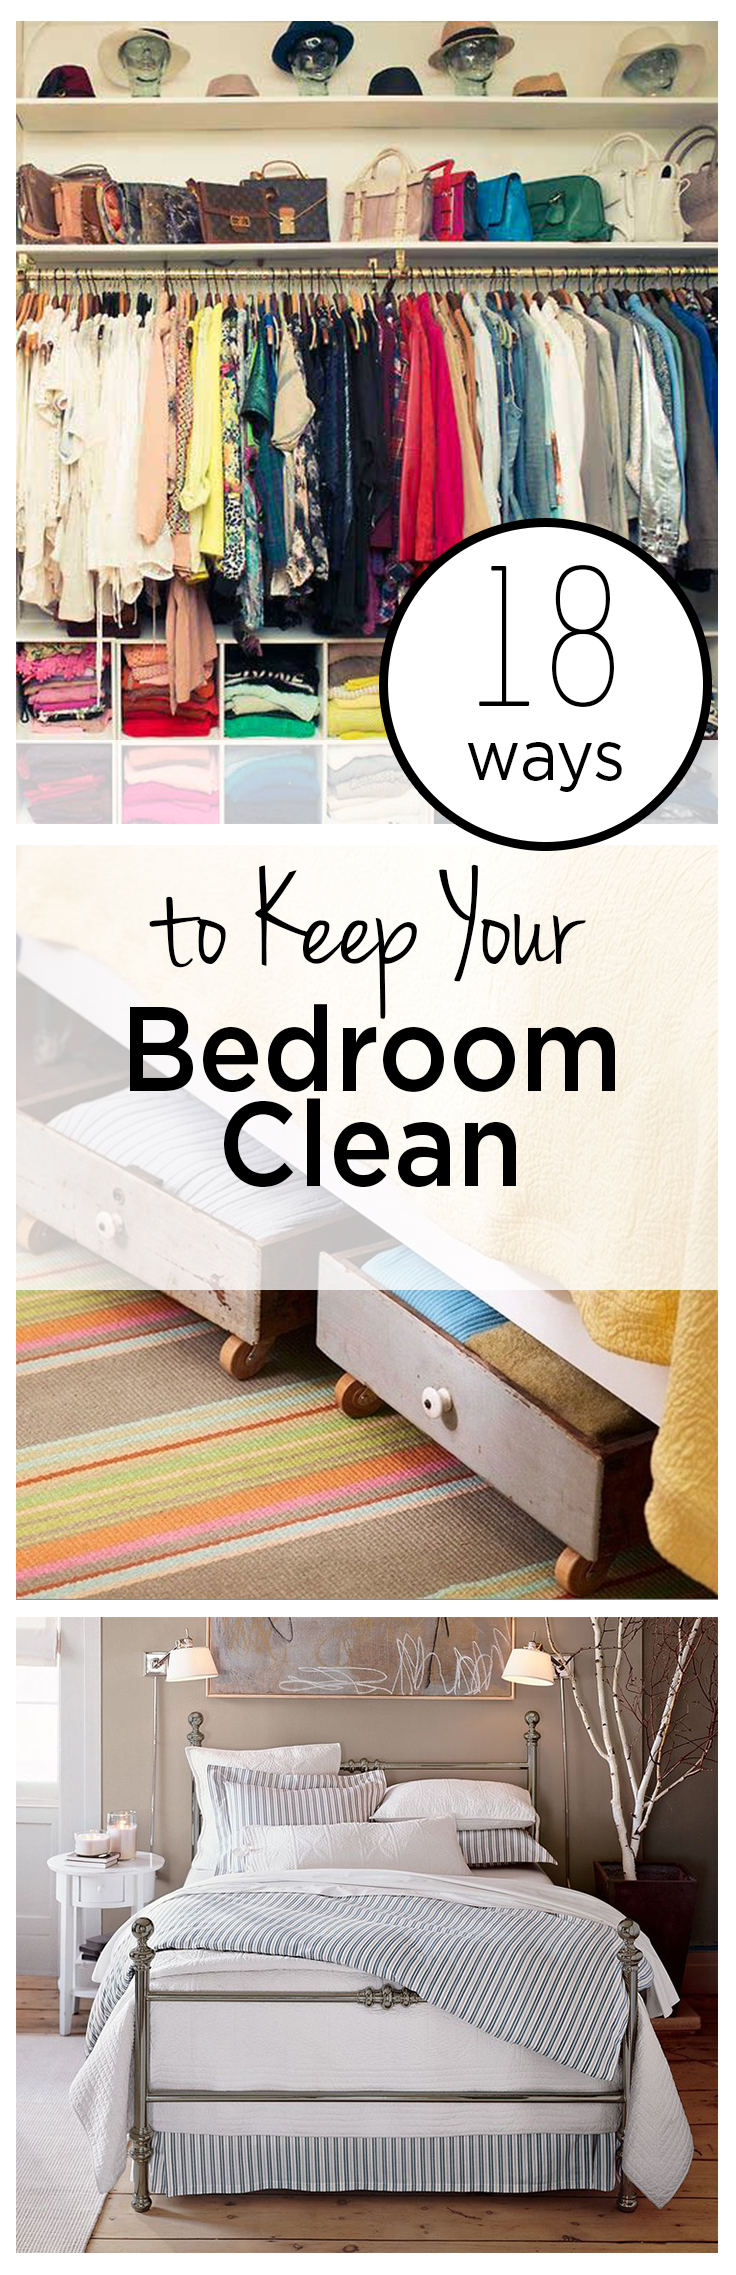 clutter, clutter free living, cleaning, cleaning hacks, popular pin, cleaning tips, cleaning hacks.